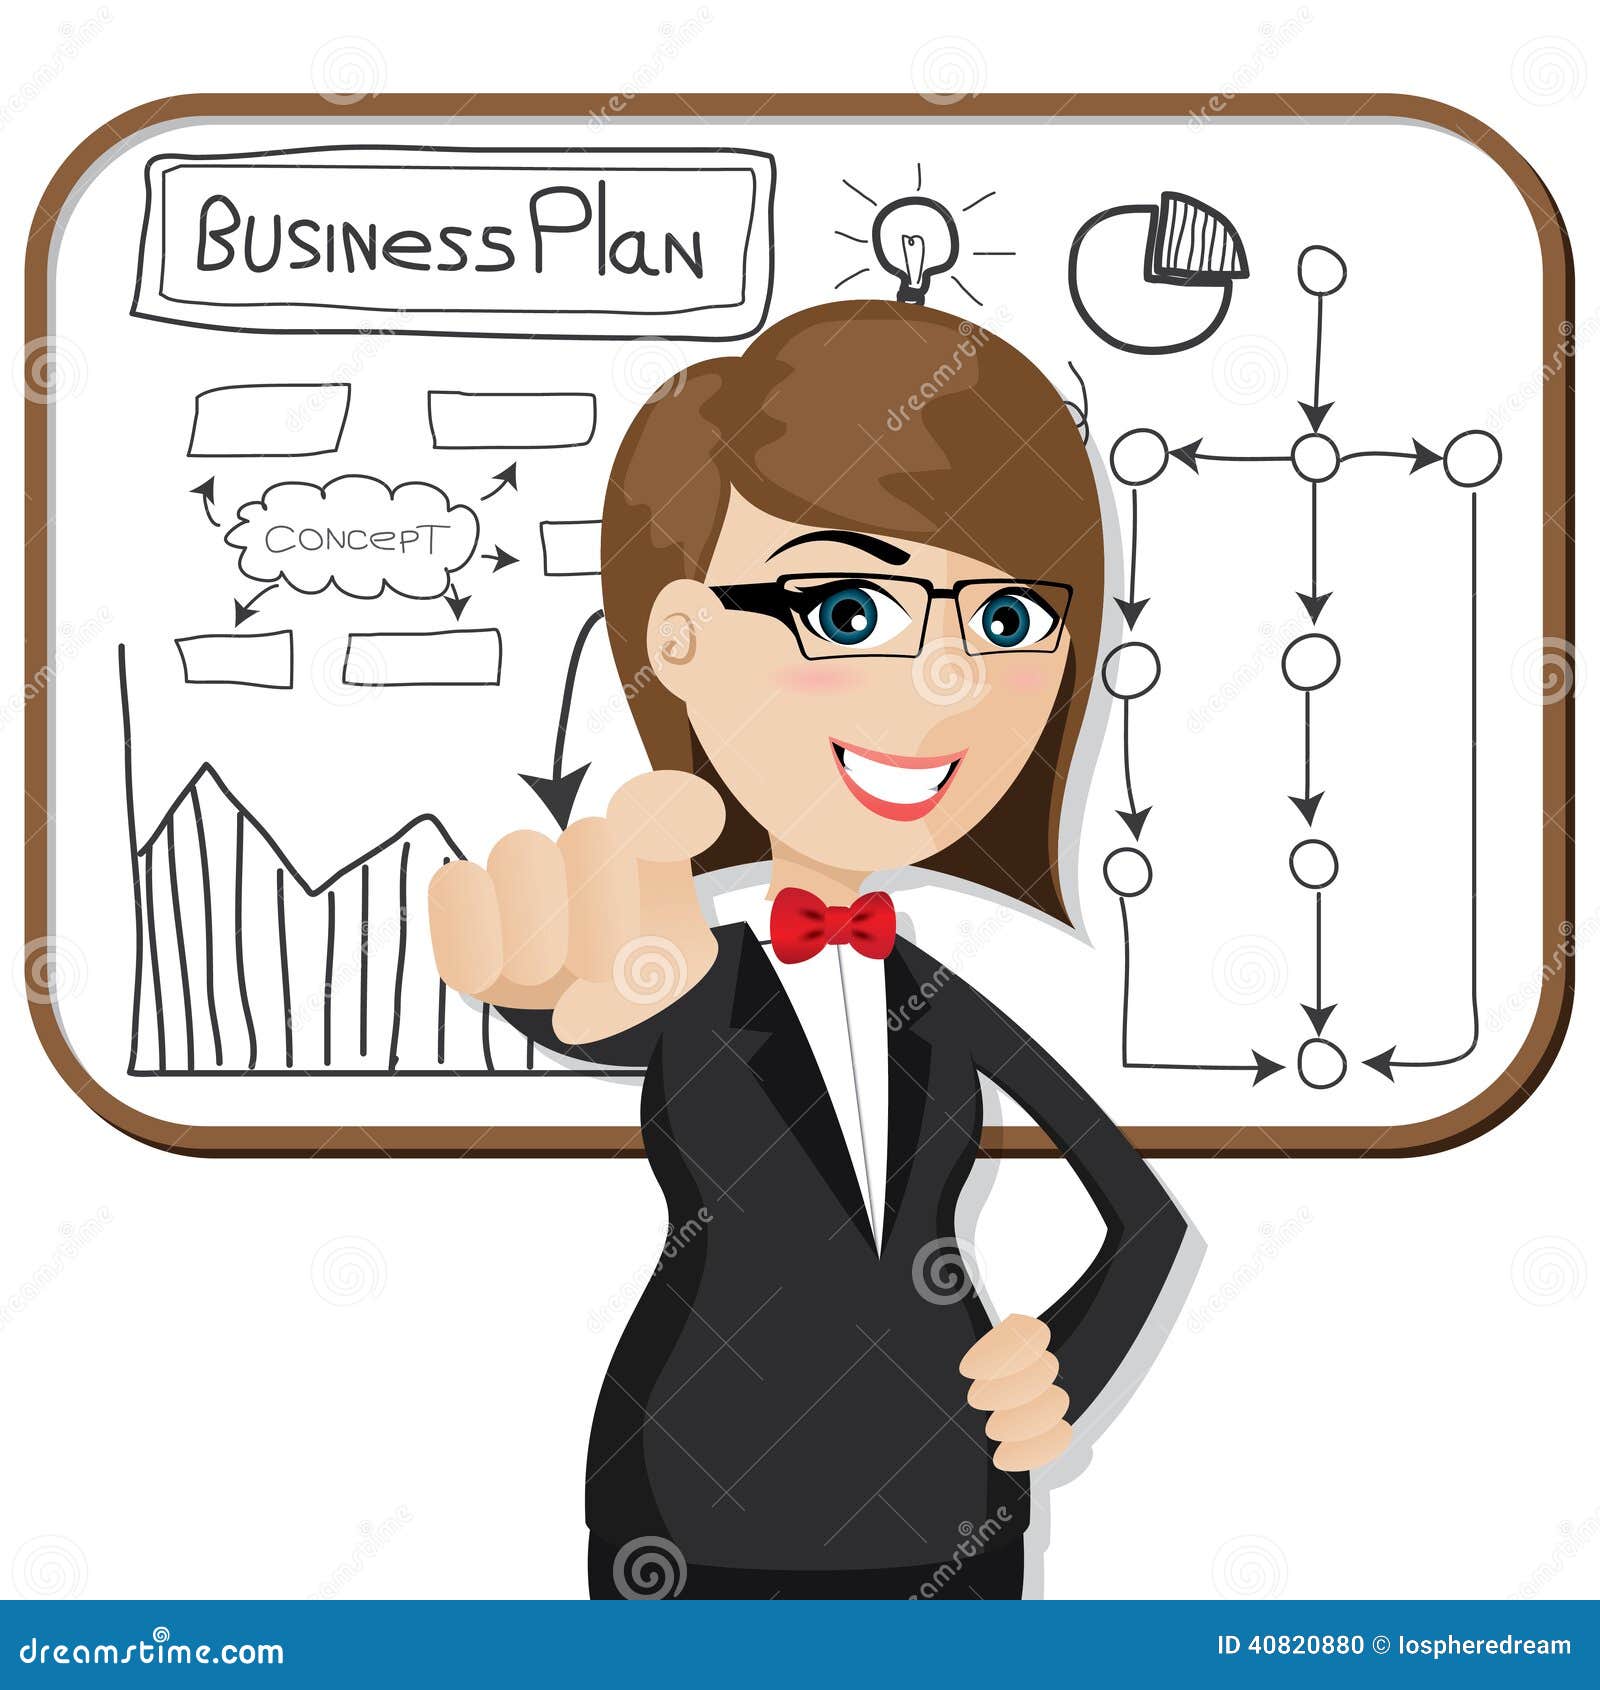 cartoon images of business plans